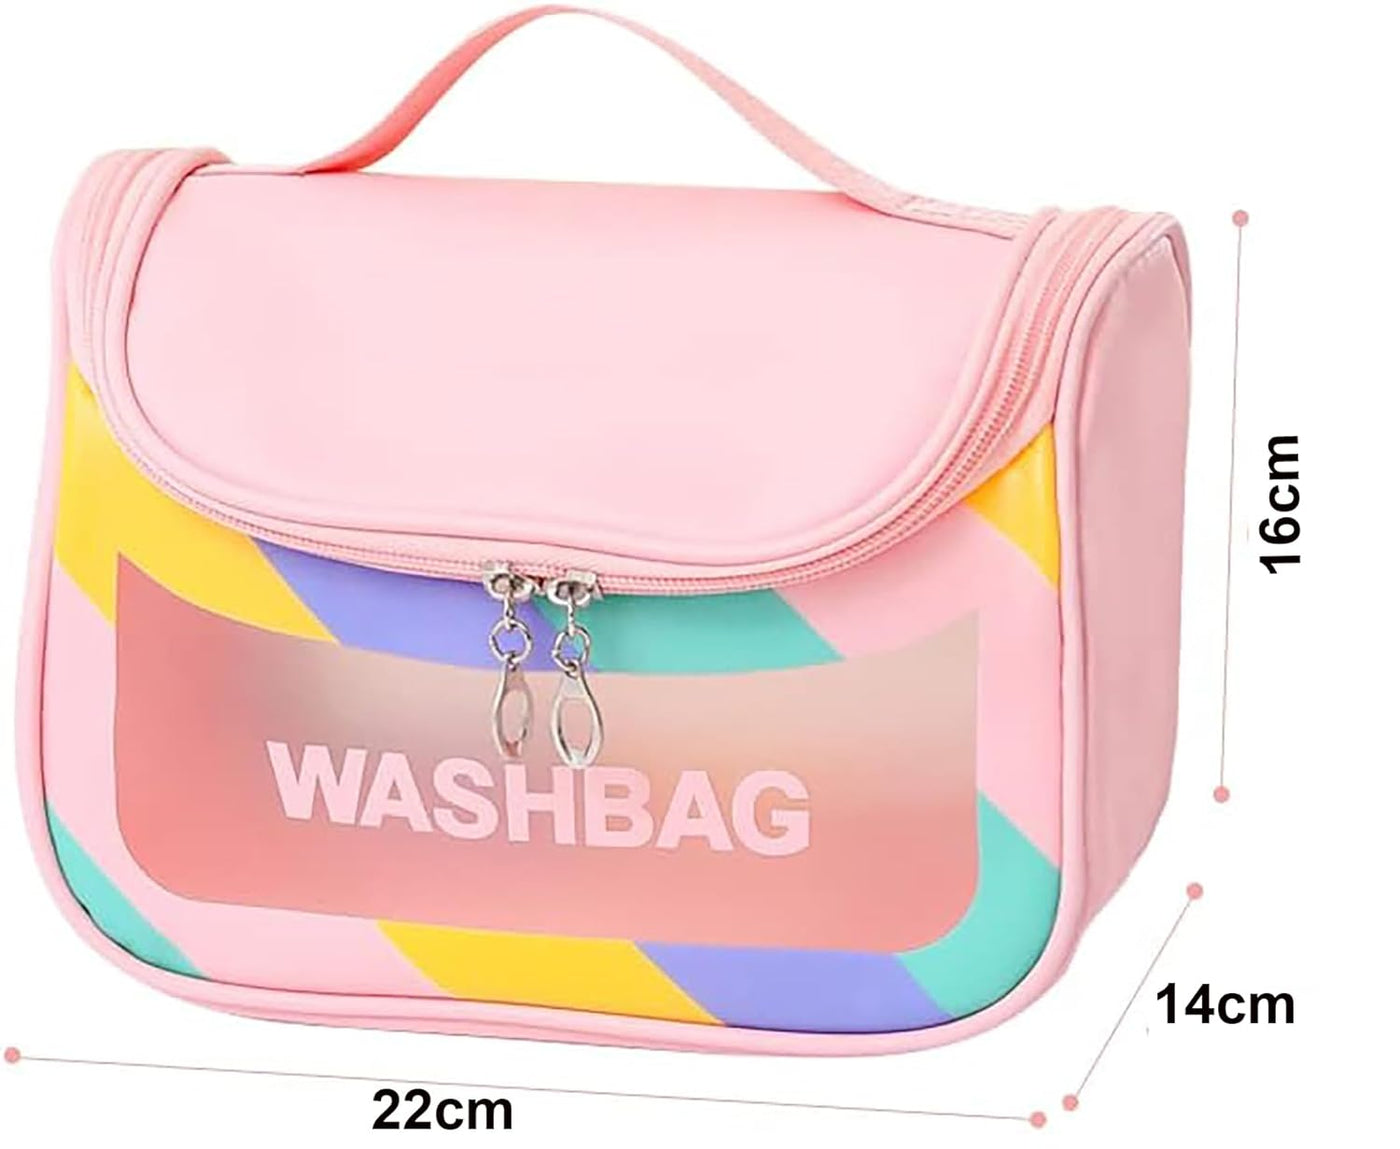 Travel Toiletry Bag for Women, Waterproof Cosmetic Wash Bag with Handy Handle - Pink